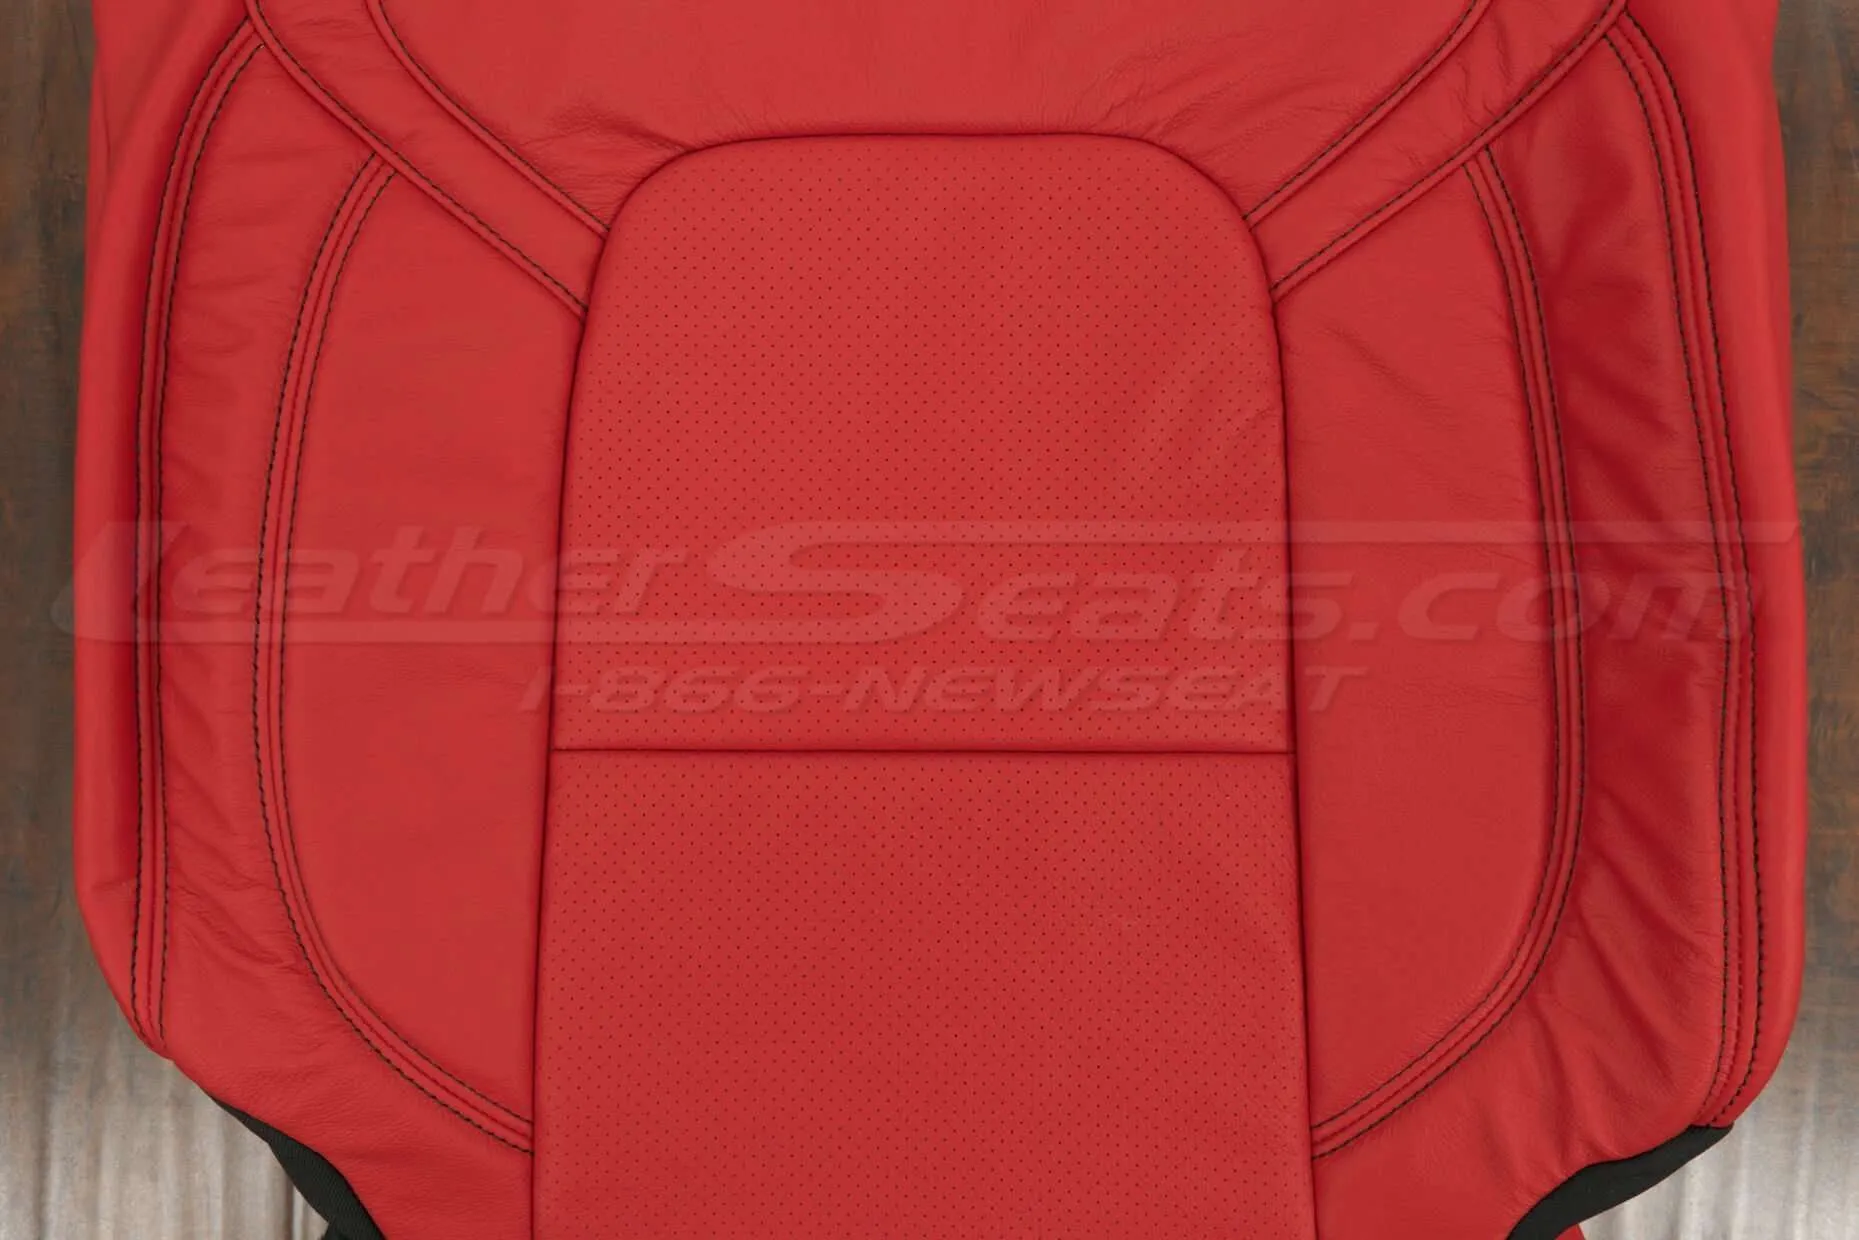 Perforated combo on backrest